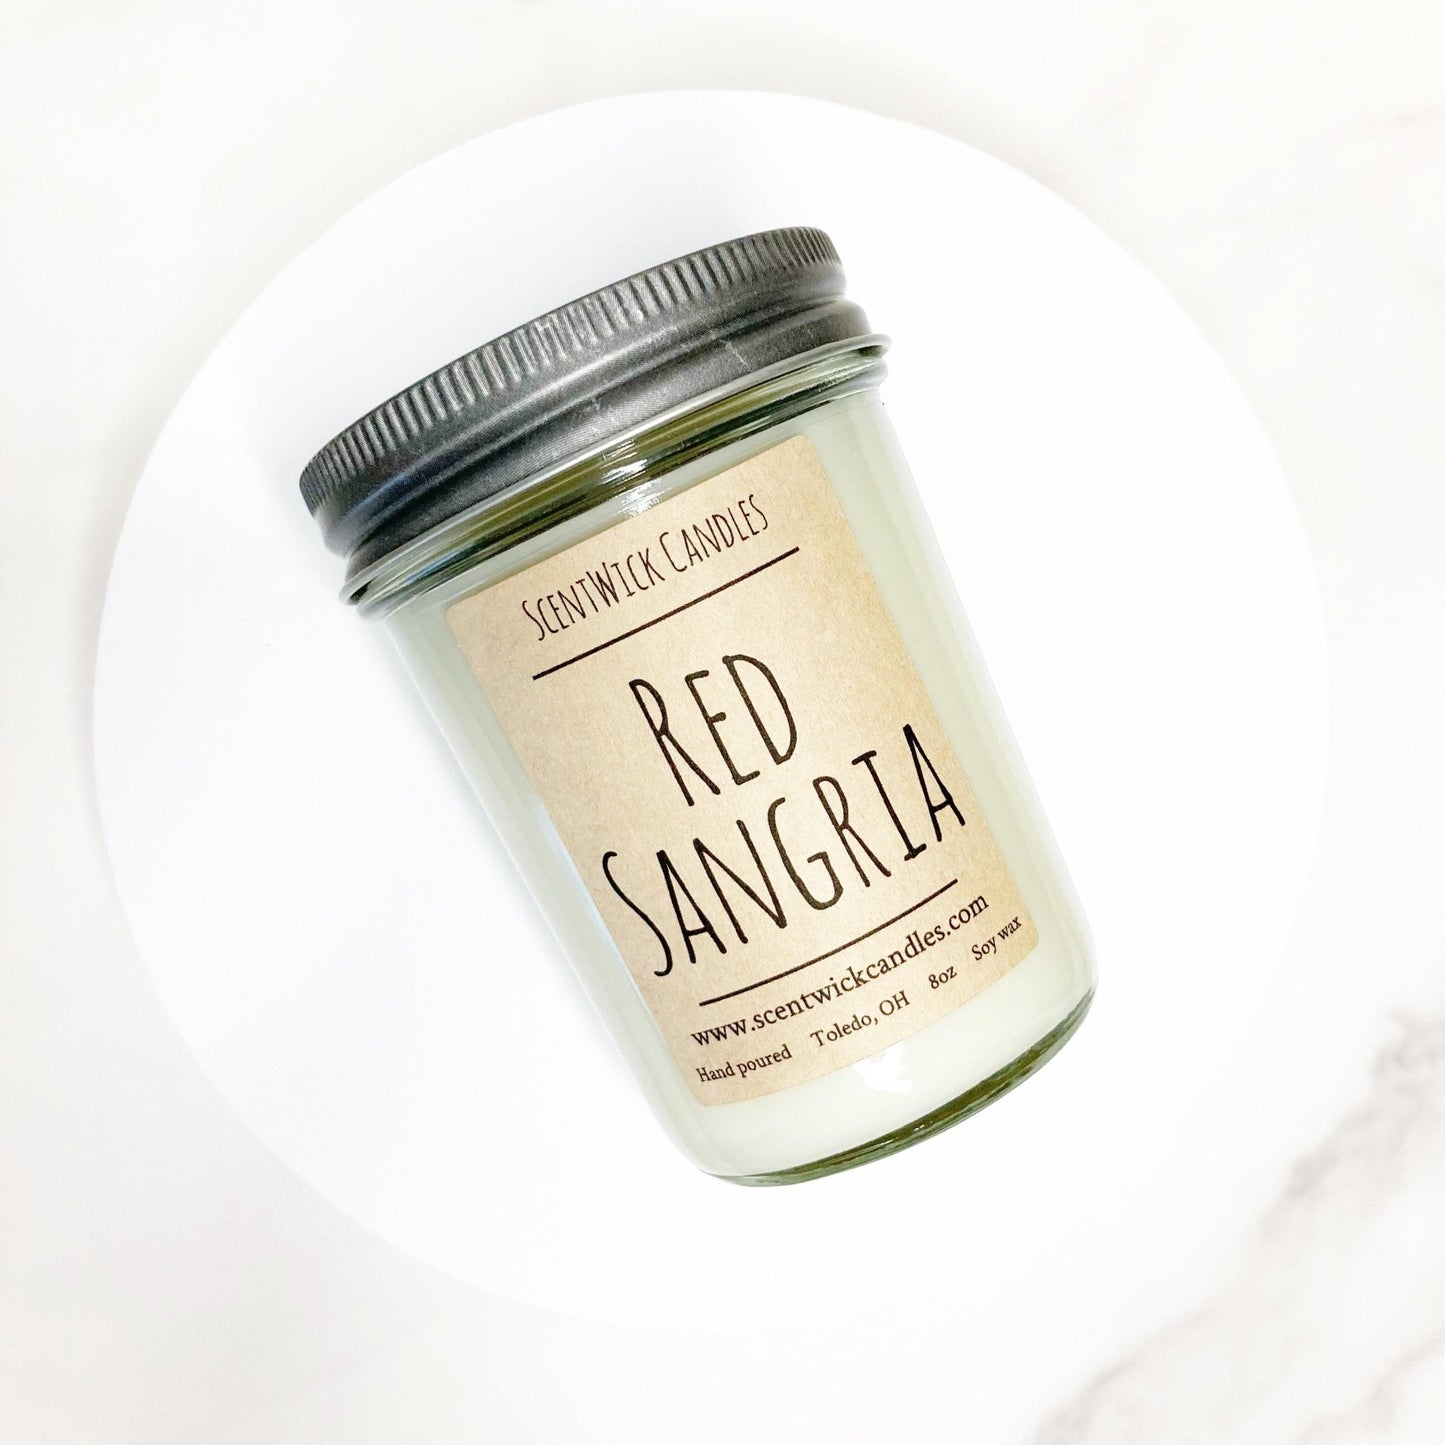 Red Sangria Candle - ScentWick Candles